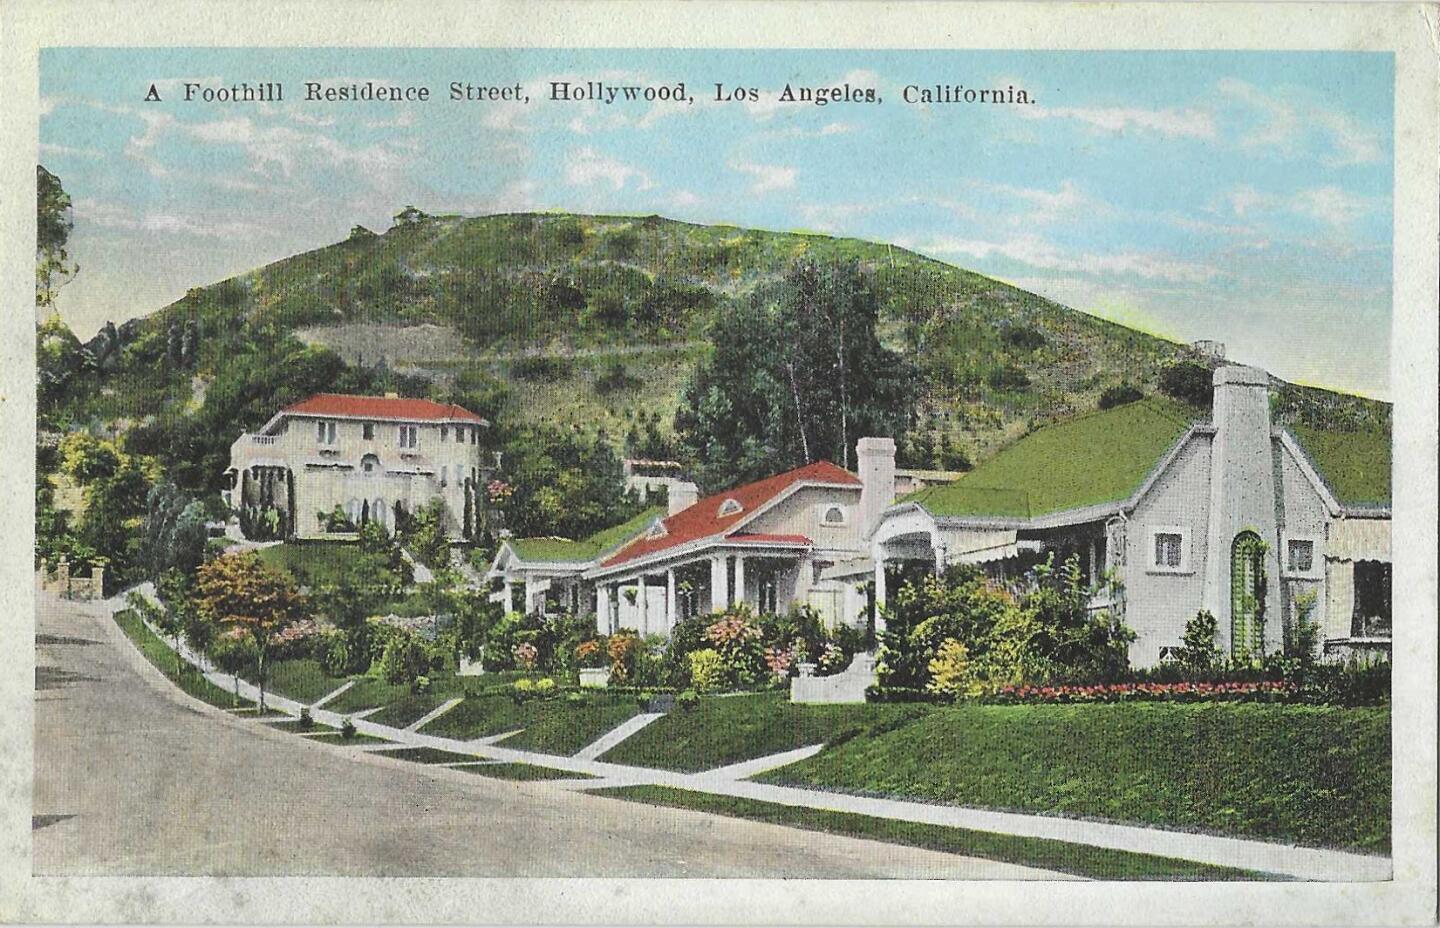 A vintage postcard reads "A Foothill Residence Street, Hollywood, Los Angeles, California"